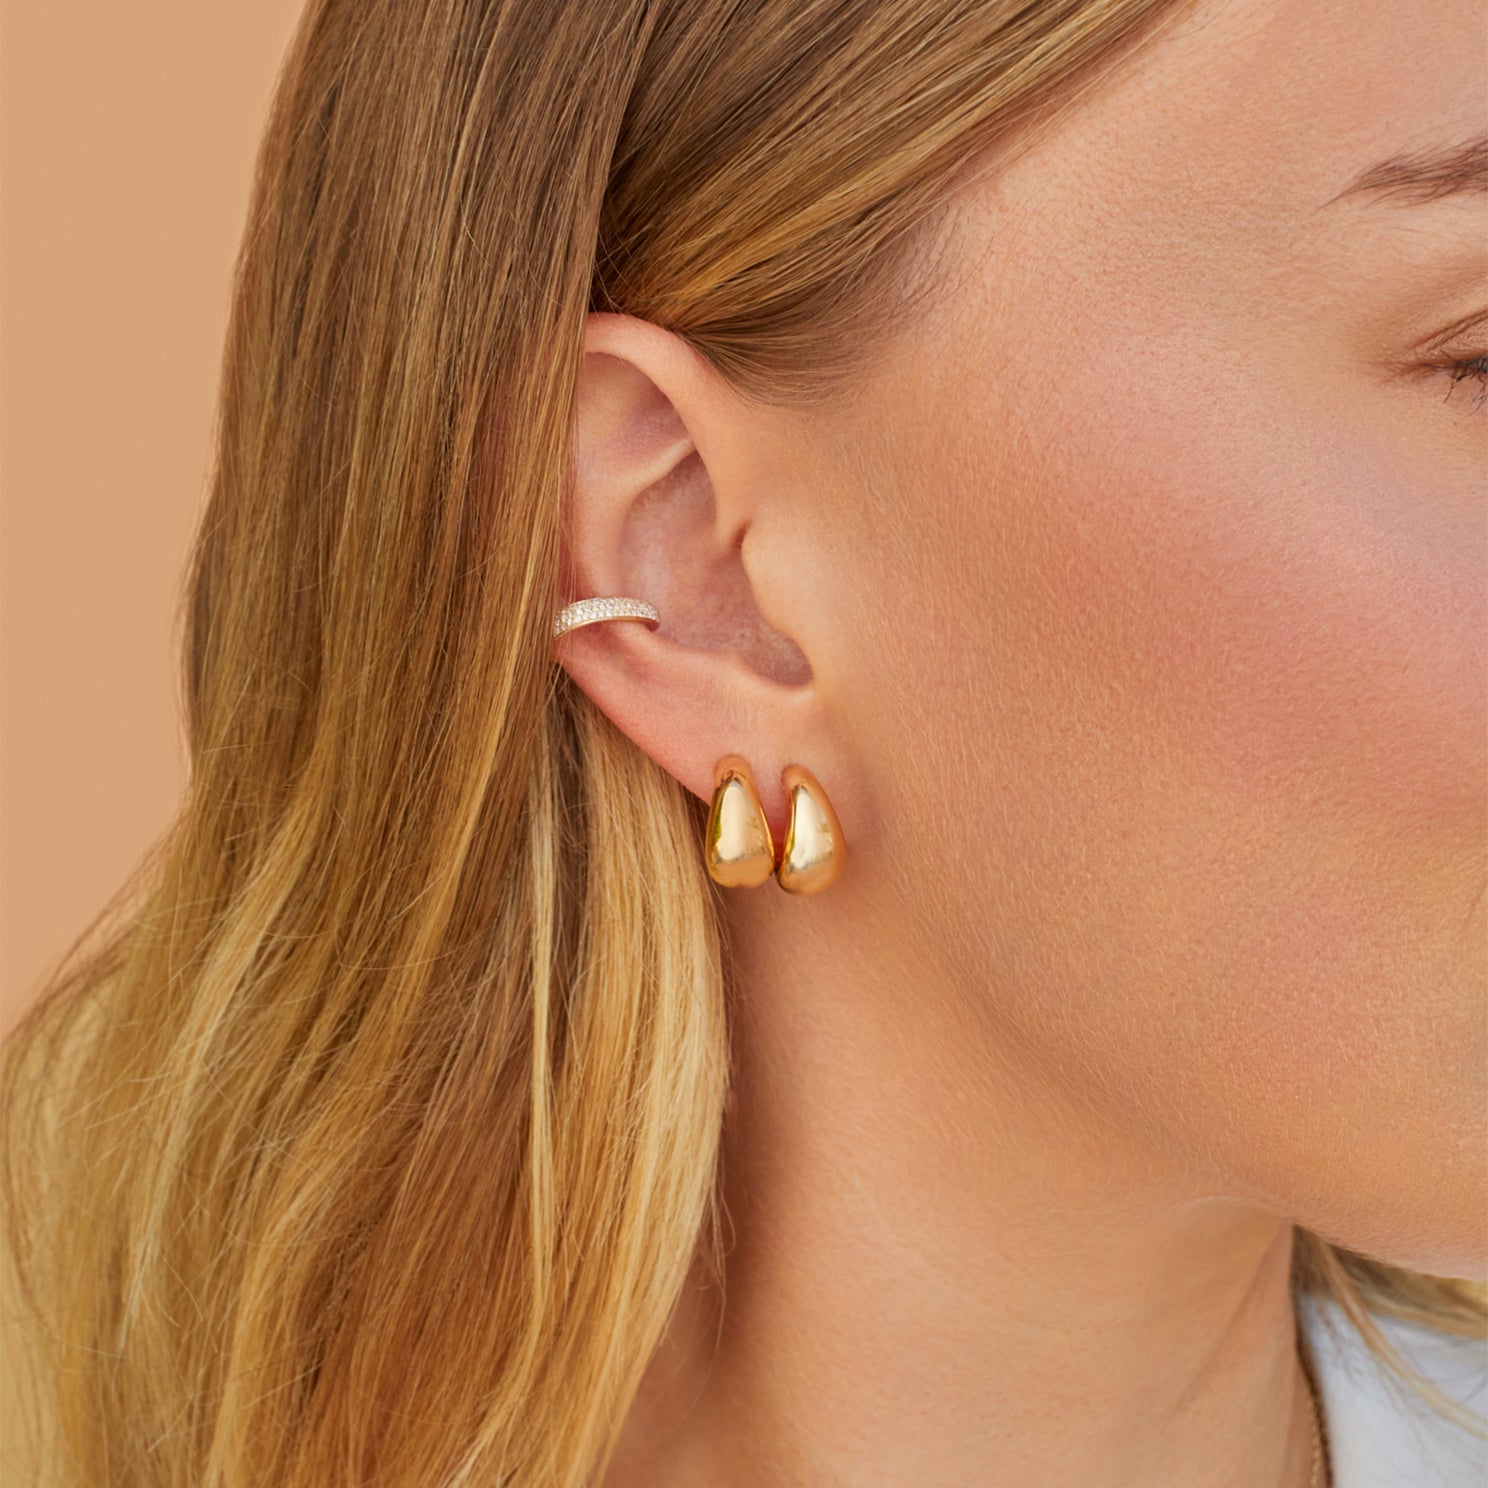 EF Collection 14k yellow gold earrings styled on ear lobe of model